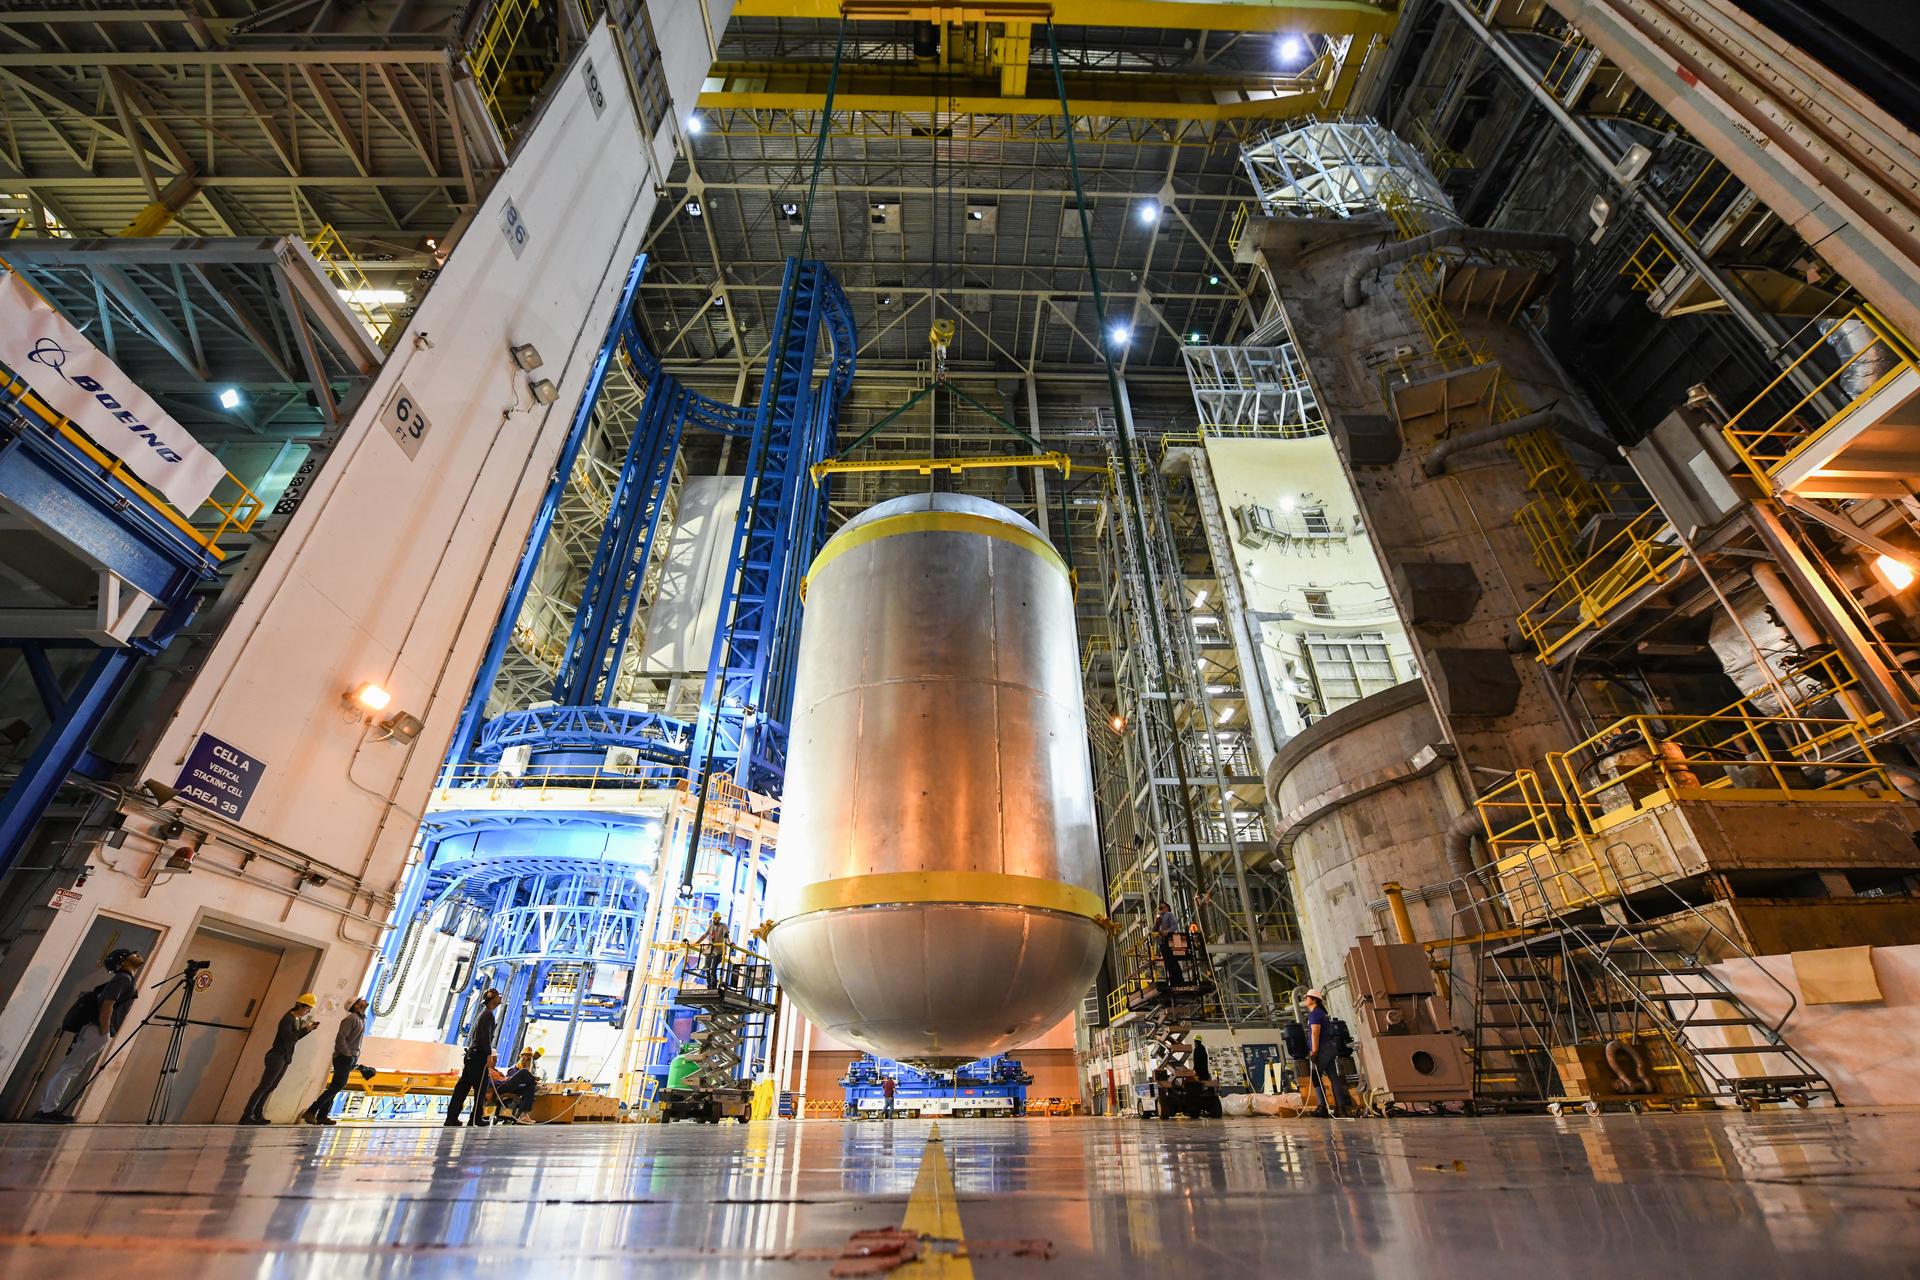 This image shows the latest progress NASA has made in manufacturing the liquid oxygen tank for the second core stage of NASA’s Space Launch System (SLS) rocket. The liquid oxygen tank will be used for the first crewed mission, Artemis II, of the agency’s Artemis program. Teams at NASA’s Michoud Assembly Facility in New Orleans recently completed internal cleaning of the liquid oxygen, or LOX, tank at the facility. Following the cleaning, crews prepared the propellant tank for the next phase of phase of assembly in a different area of the factory by moving, or breaking over, the tank from a vertical to horizontal position. The LOX tank is one of five major elements that make up the rocket’s massive 212-foot-tall core stage. The propellant tank holds 196,000 gallons of supercooled liquid oxygen to help fuel four RS-25 engines, and the internal cleaning ensures no contaminants make their way into the complex propulsion and engine systems of the deep space rocket. The stage, which includes a cluster of four RS-25, will produce more than 2 million pounds of thrust to help launch the SLS rocket and astronauts aboard NASA’s Orion spacecraft around the Moon for Artemis II.   NASA is working to land the first woman and the next man on the Moon by 2024. The agency’s SLS rocket offers more payload mass, volume capability and energy to speed missions through deep space and enable NASA’s Artemis lunar program. SLS, along with Orion, the human landing system, and the Gateway in orbit around the Moon are NASA’s backbone for deep space exploration. No other rocket is capable of carrying astronauts in Orion around the Moon in a single mission.